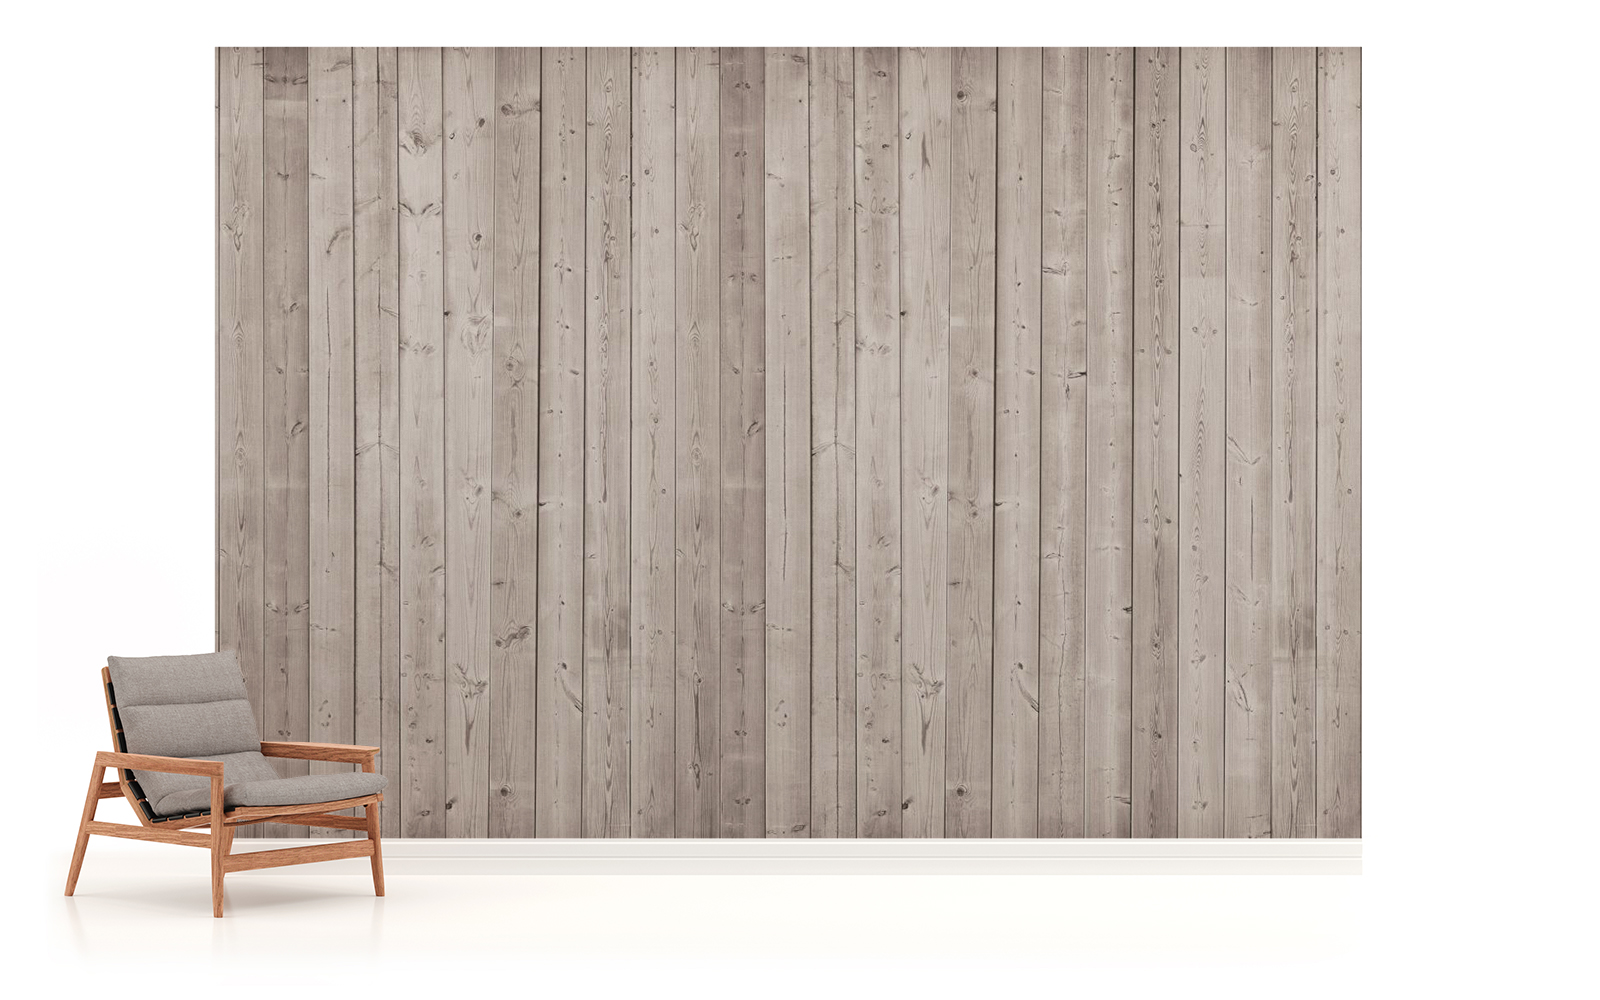 About Wood Planks Texture Photo Wallpaper Wall Mural Room Decor 1096p